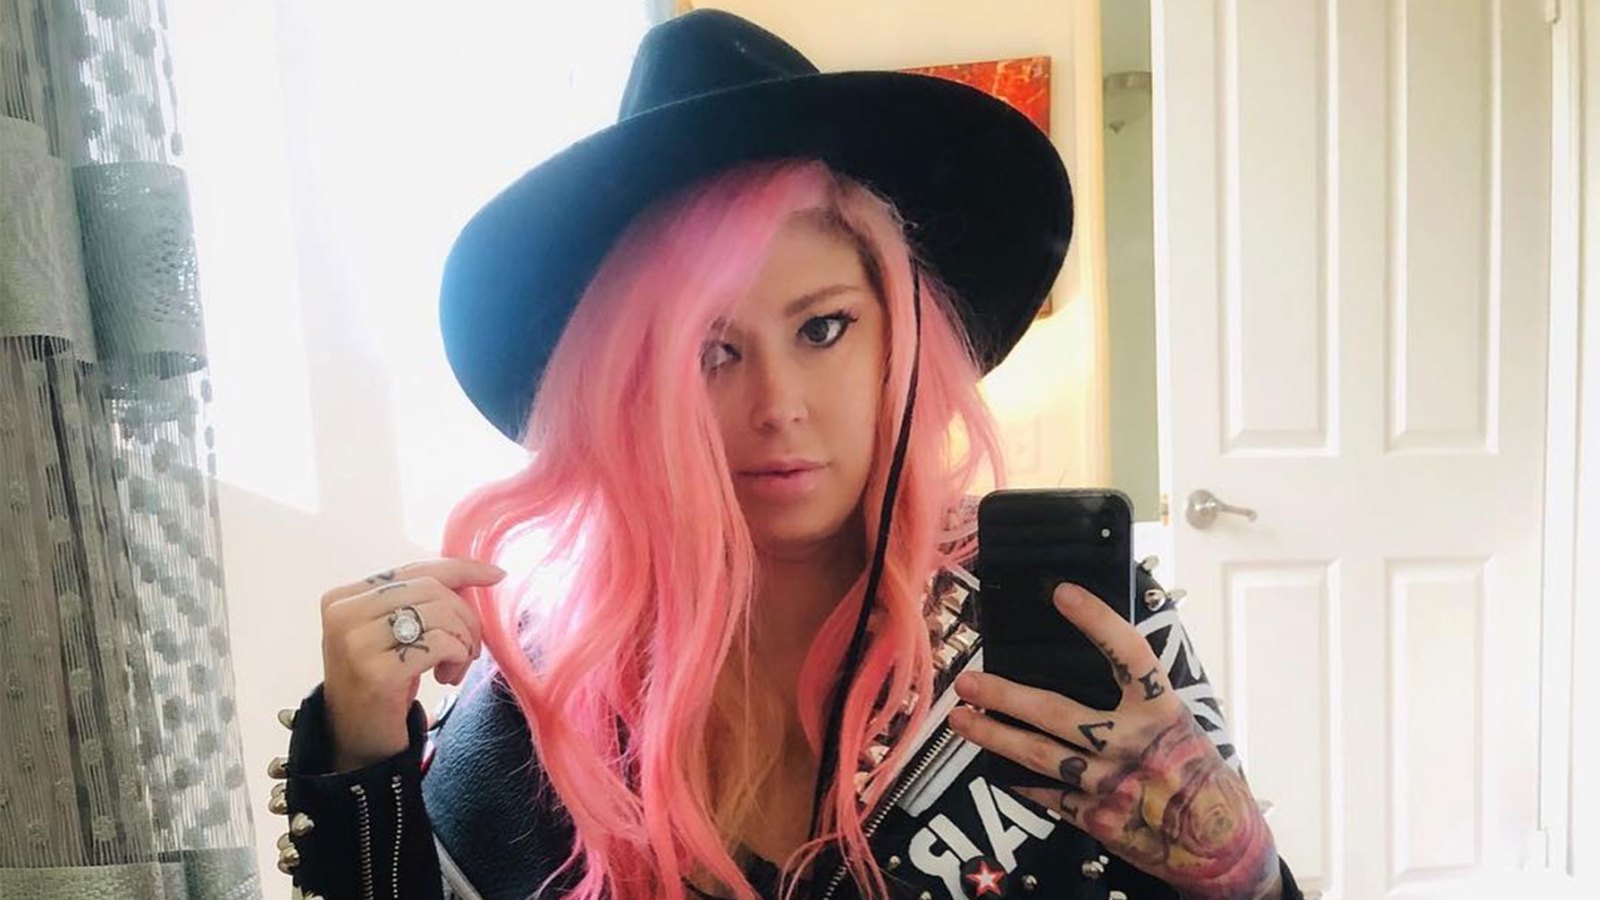 Jenna Jameson on Losing 80 Lbs: ‘I Am Being the Best I Can Be for My Daughter’